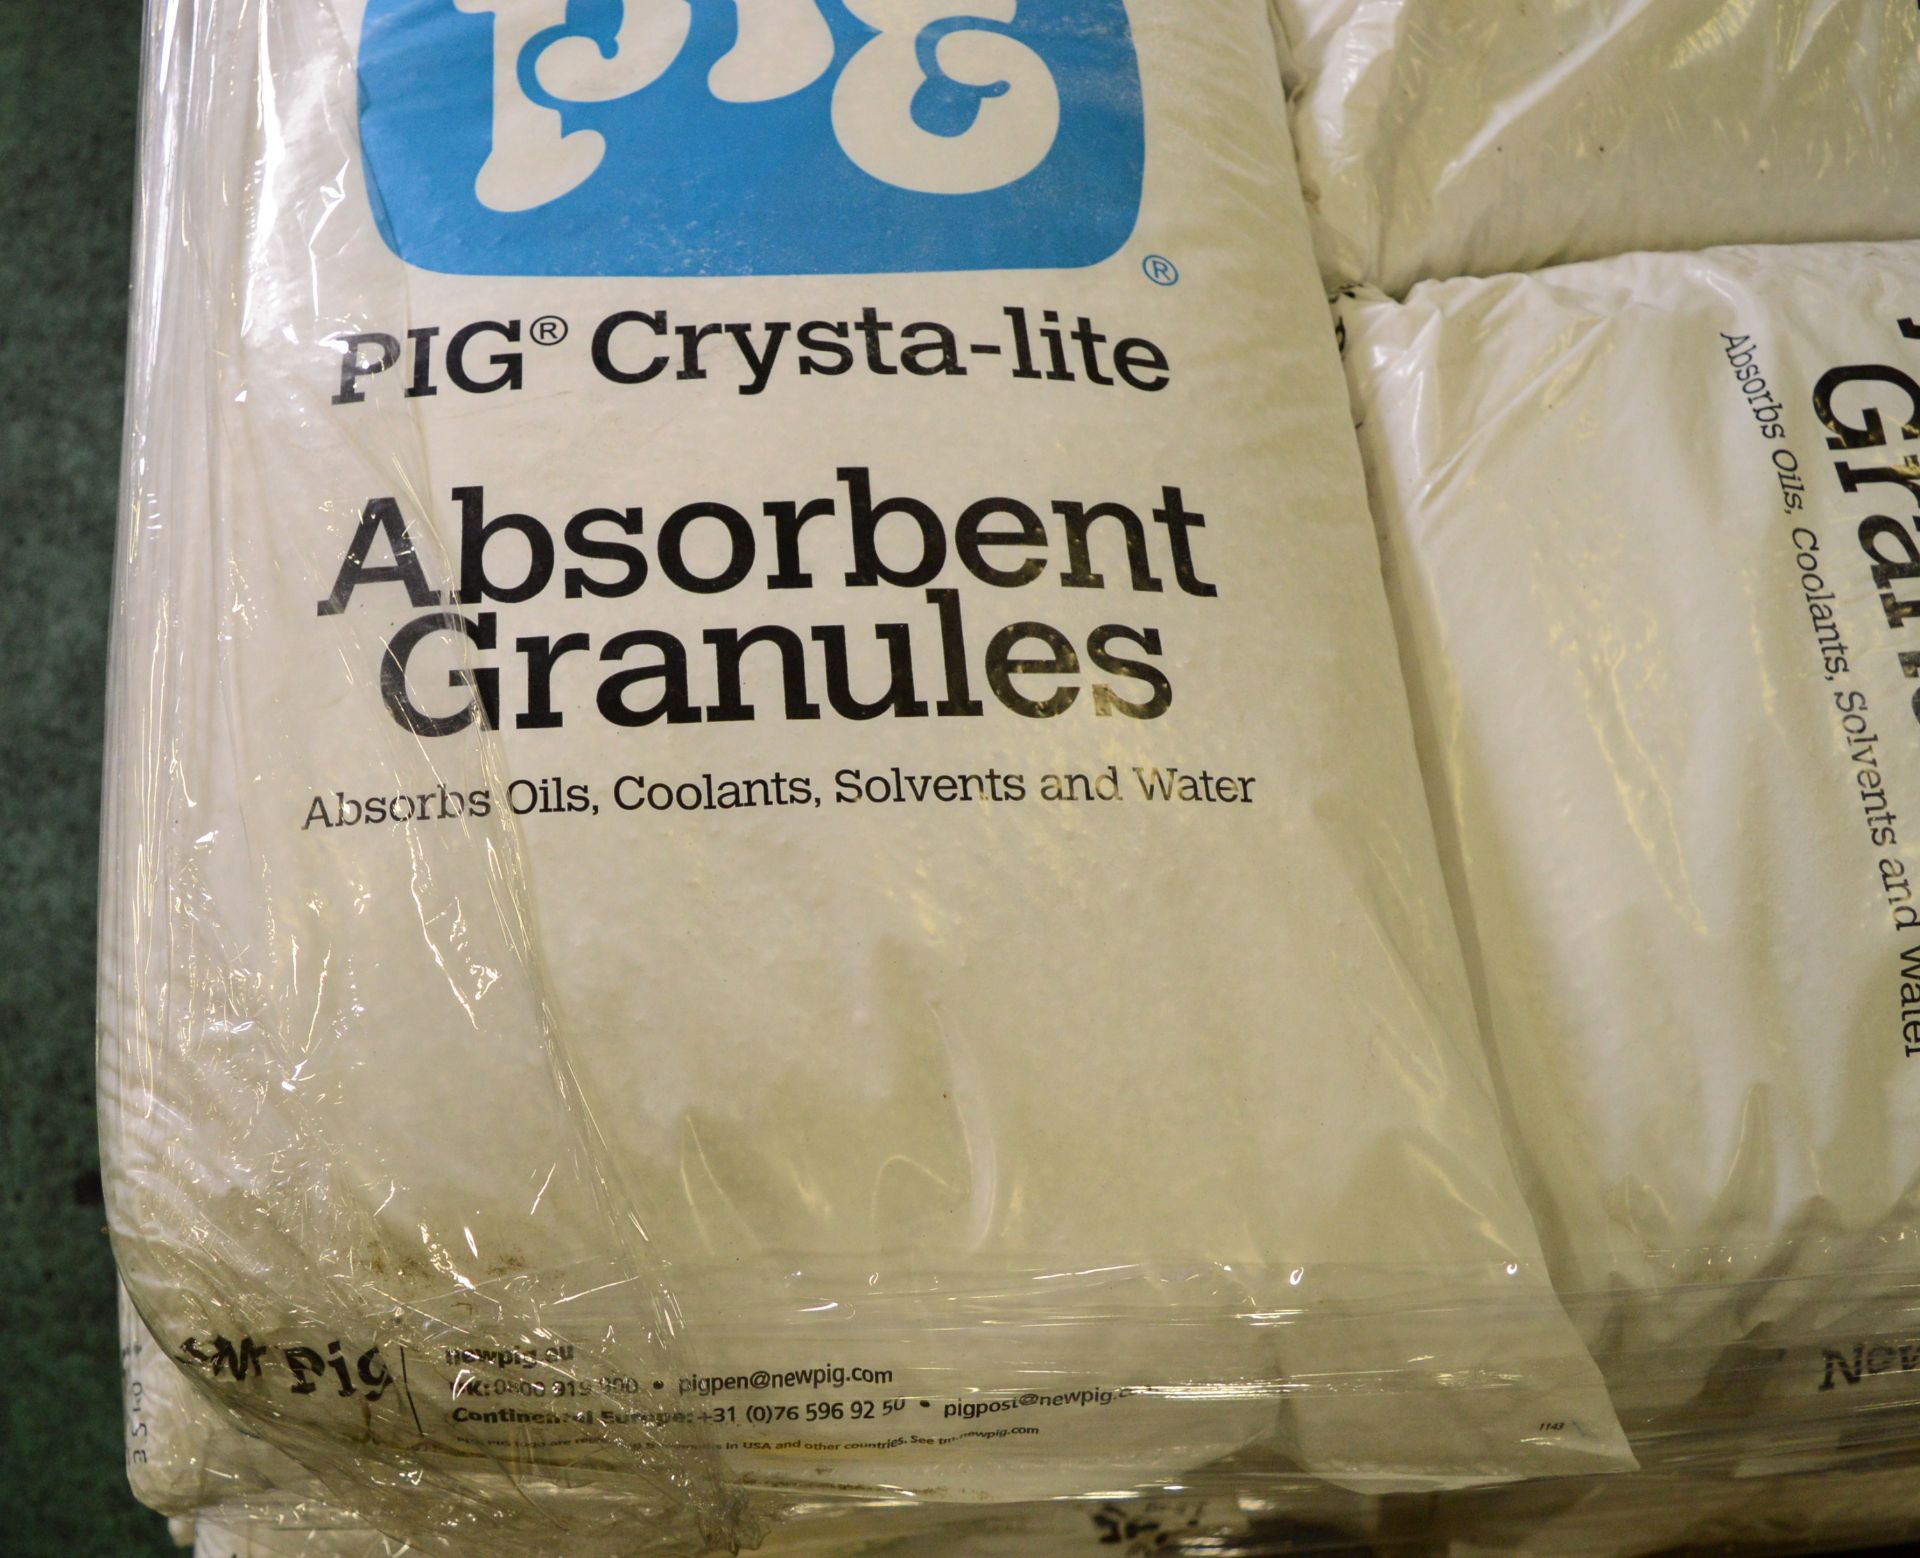 29x Bags of Pig Crysta-lite Absorbent Granules. - Image 2 of 2